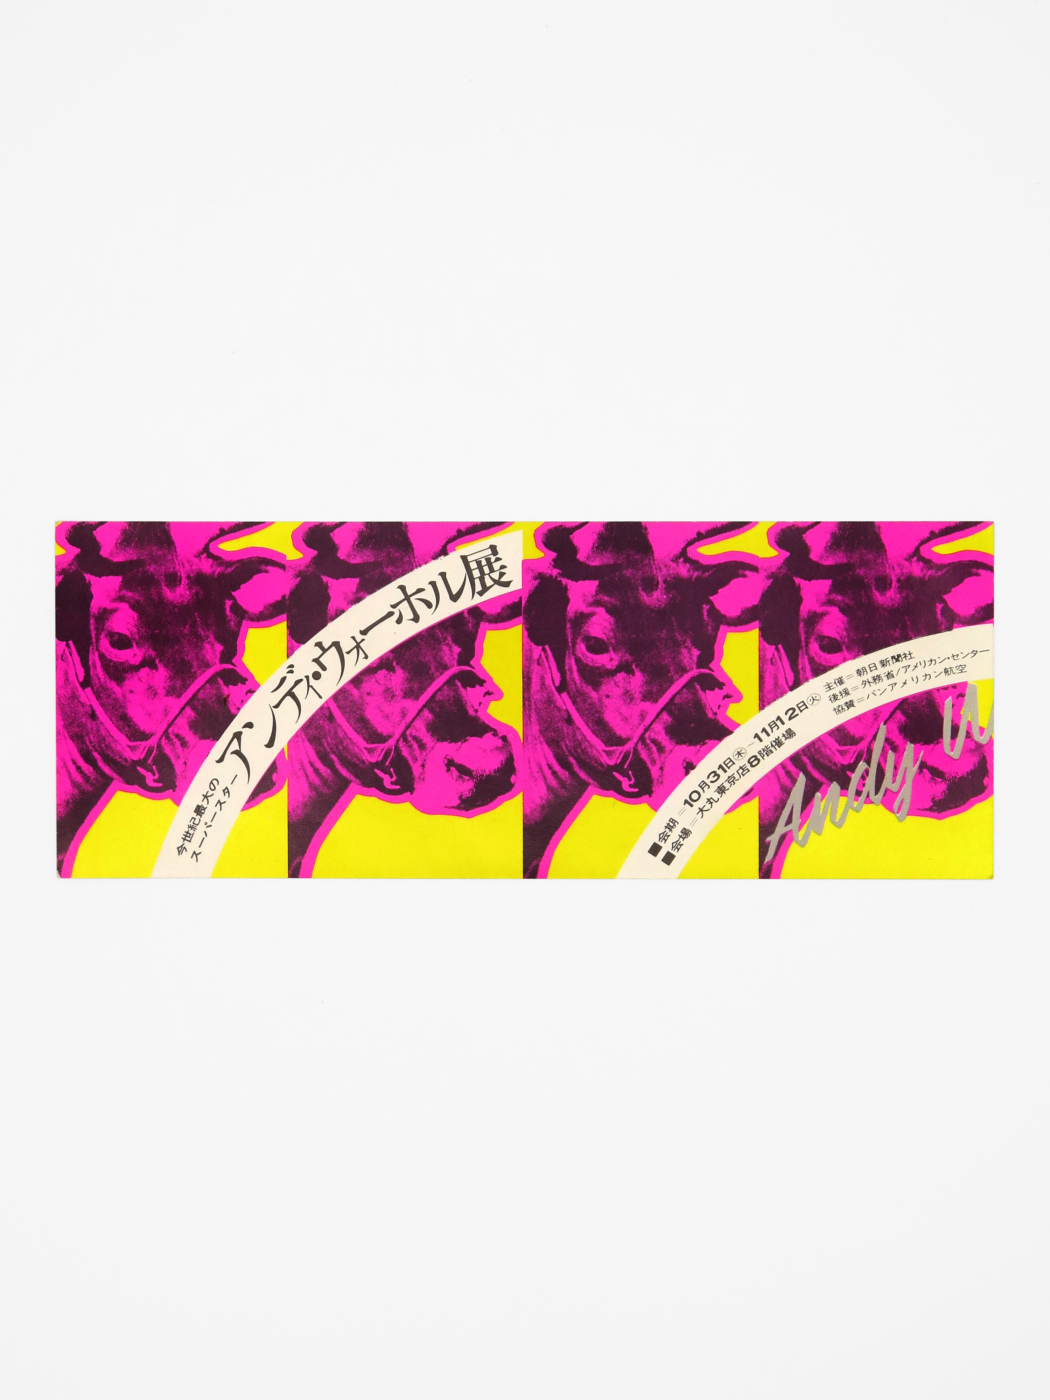 Andy Warhol, Event ticket